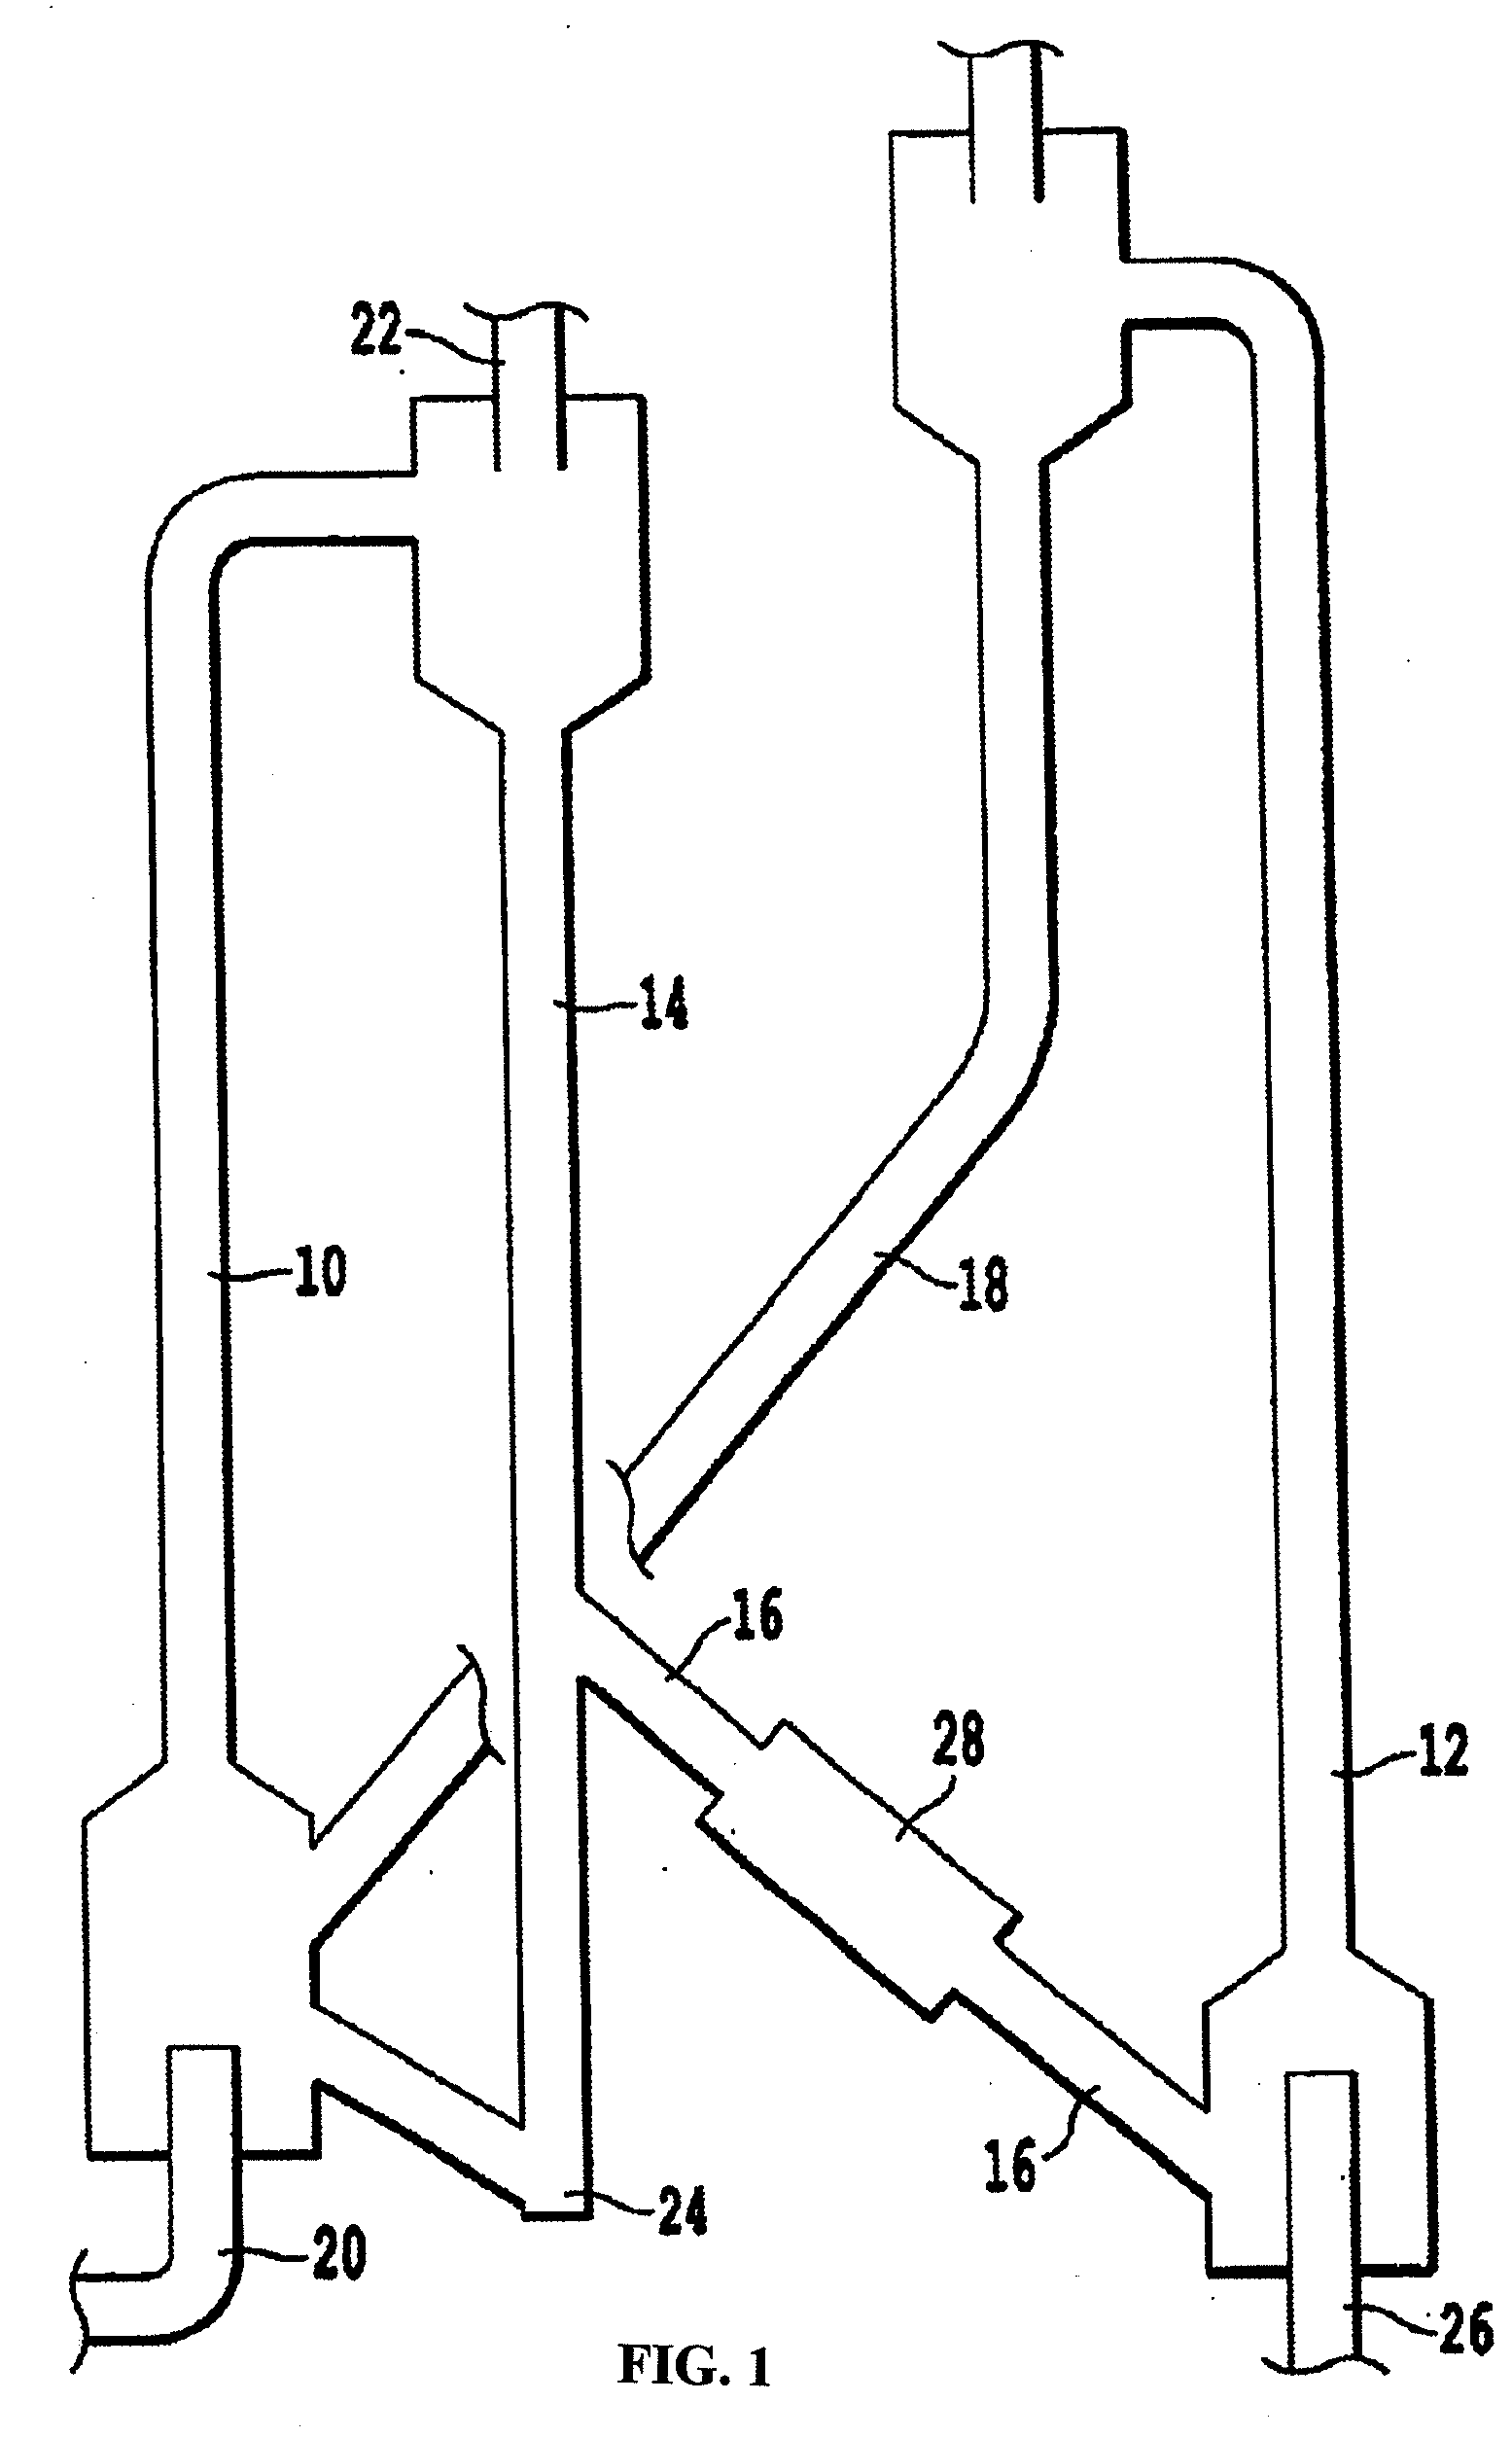 Zinc oxide-based sorbents and processes for preparing and using same